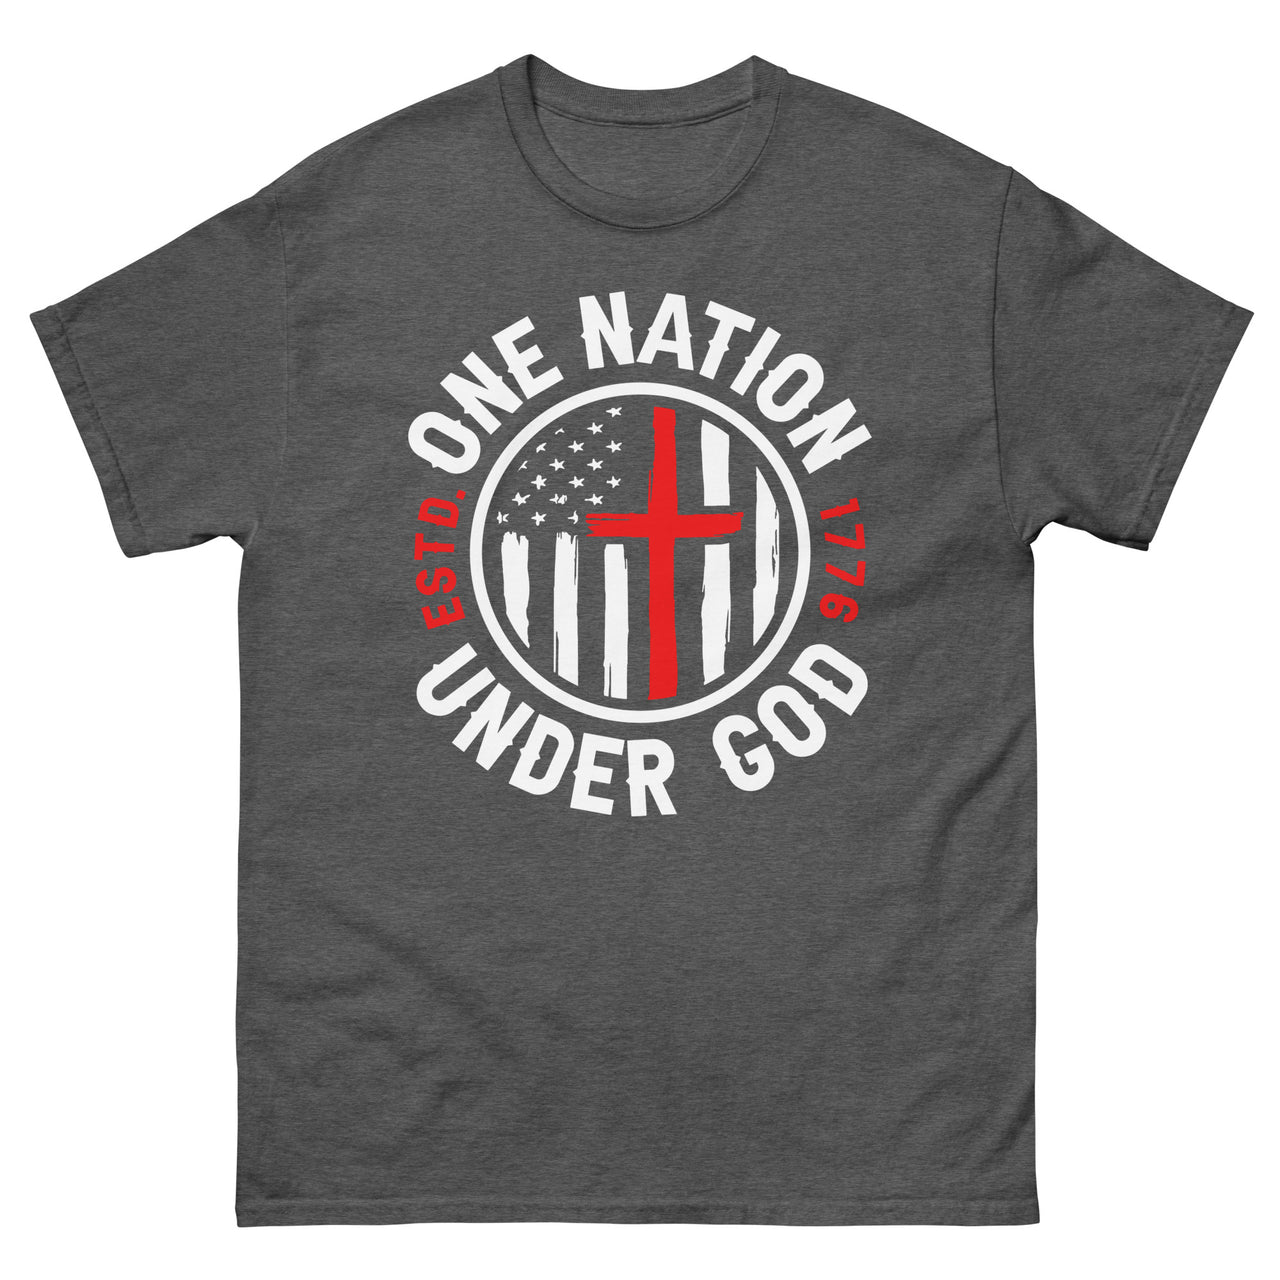 One Nation Under God Men's classic tee